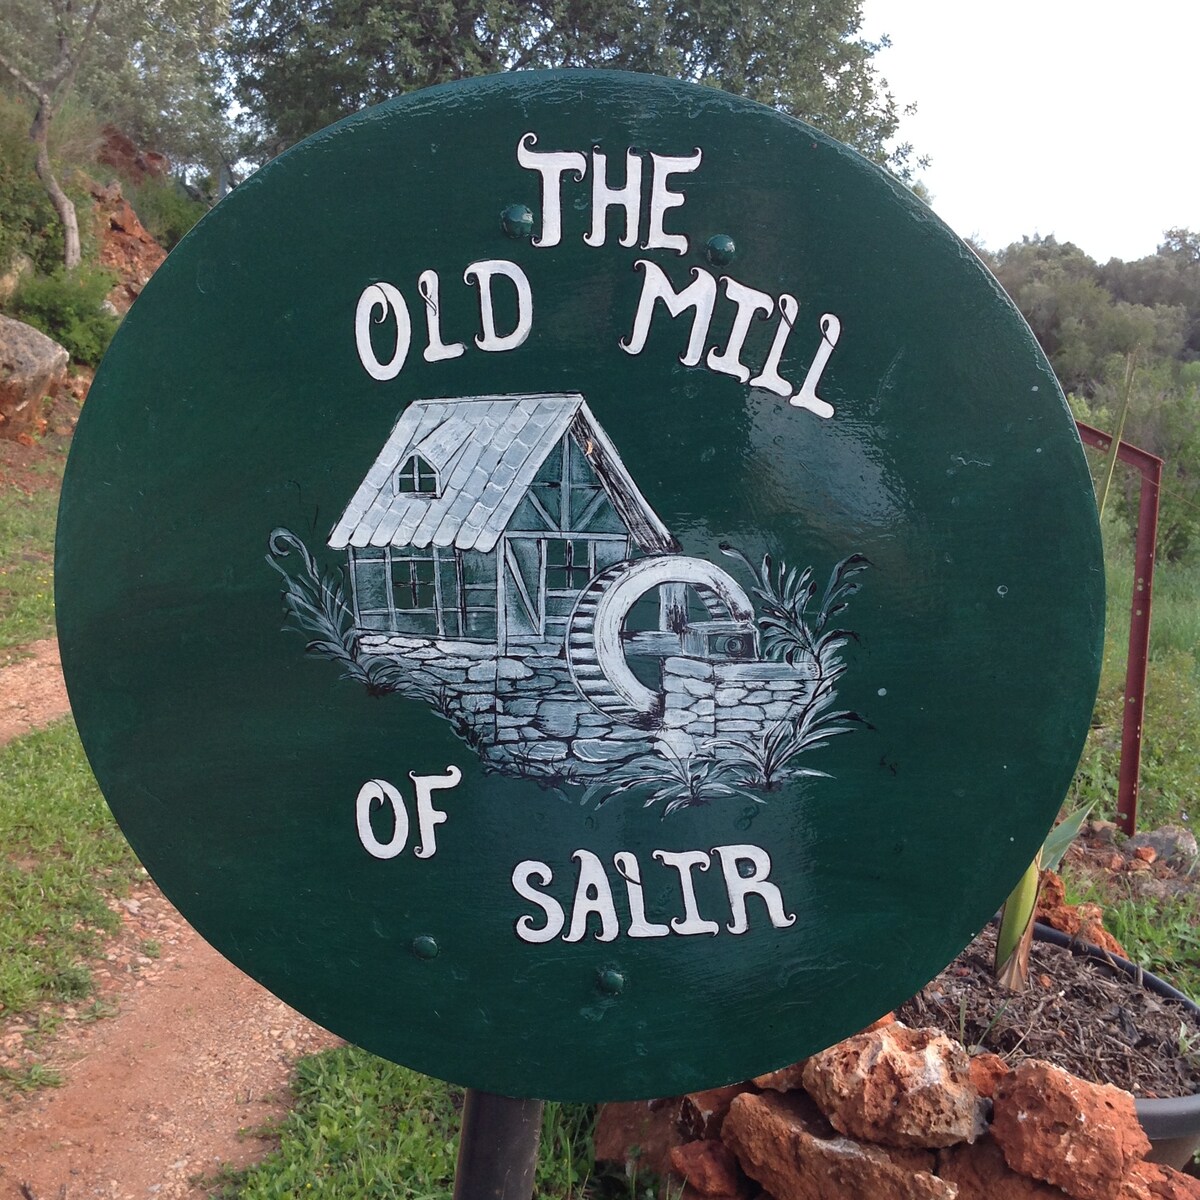 The Old Mill of Salir